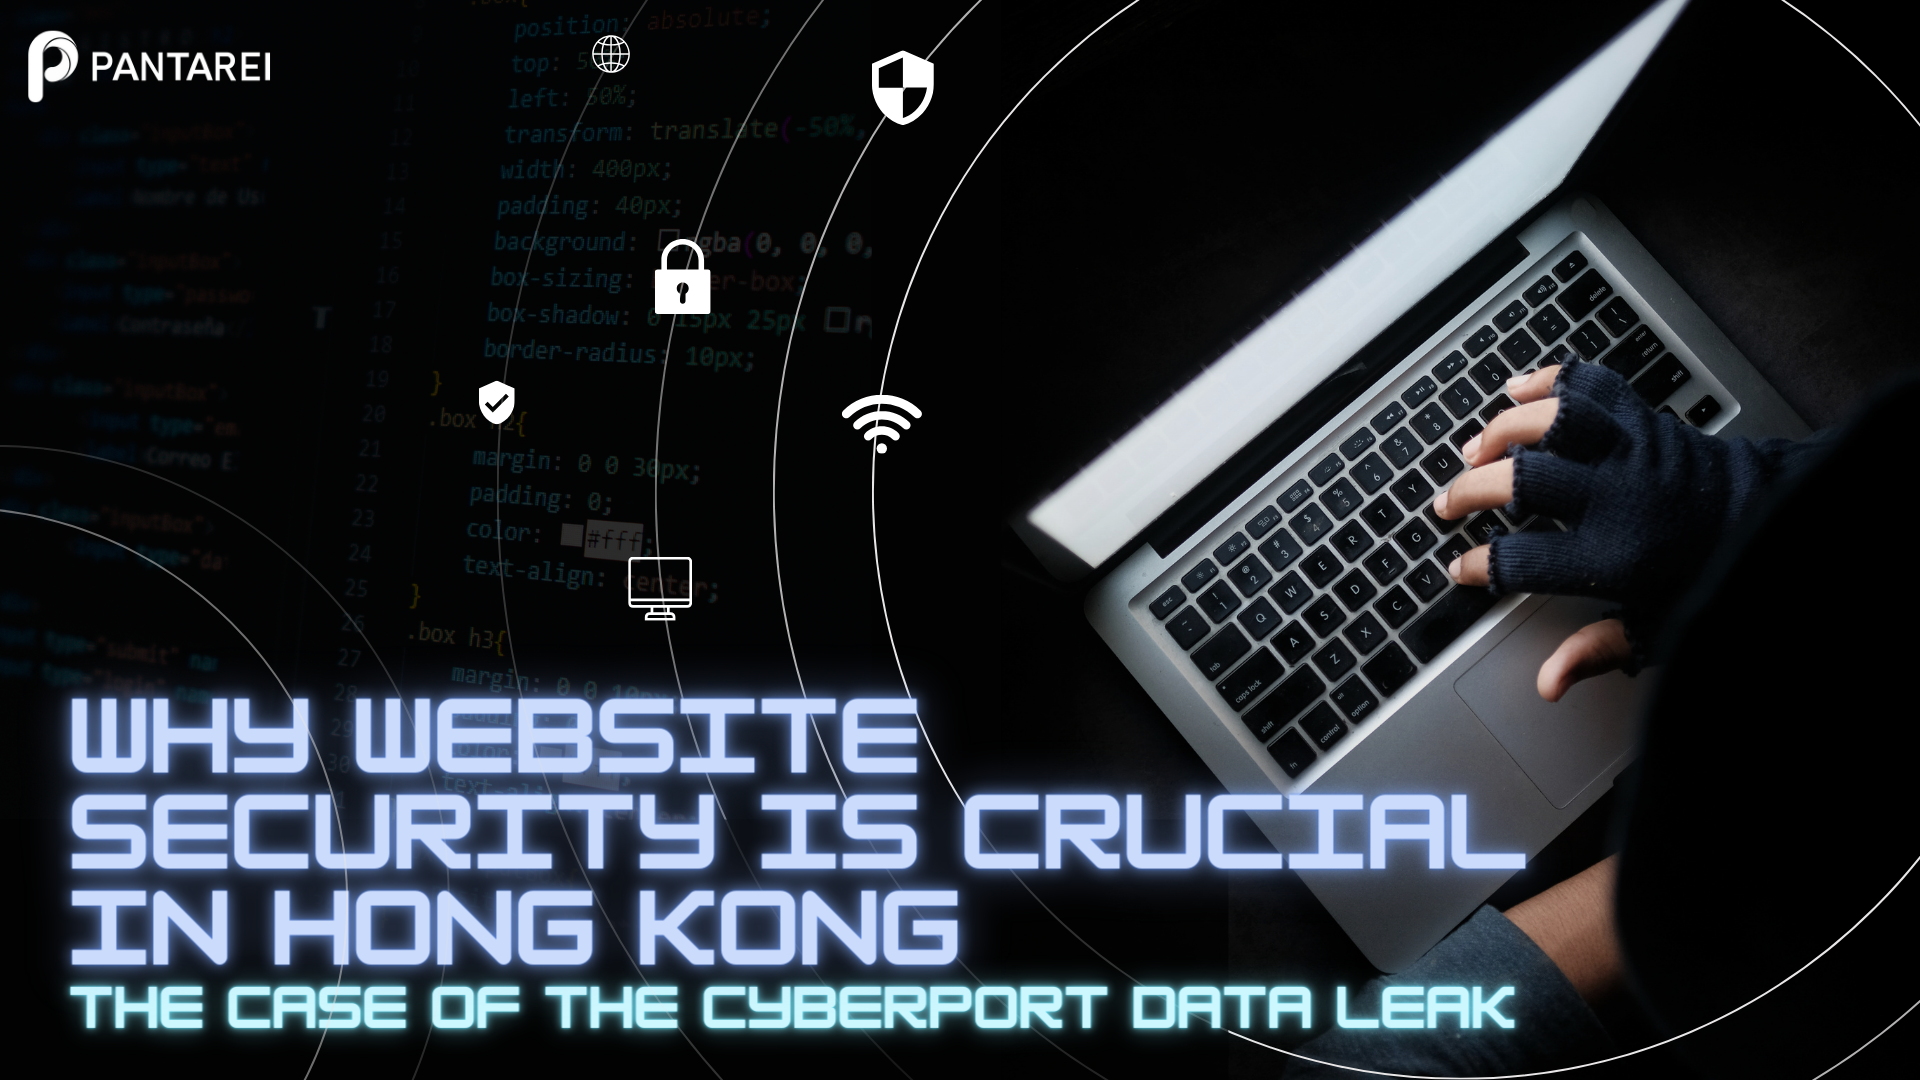 Thumbnail of "Why Website Security is Crucial in Hong Kong: The Case of the Cyber Port Data Leak"